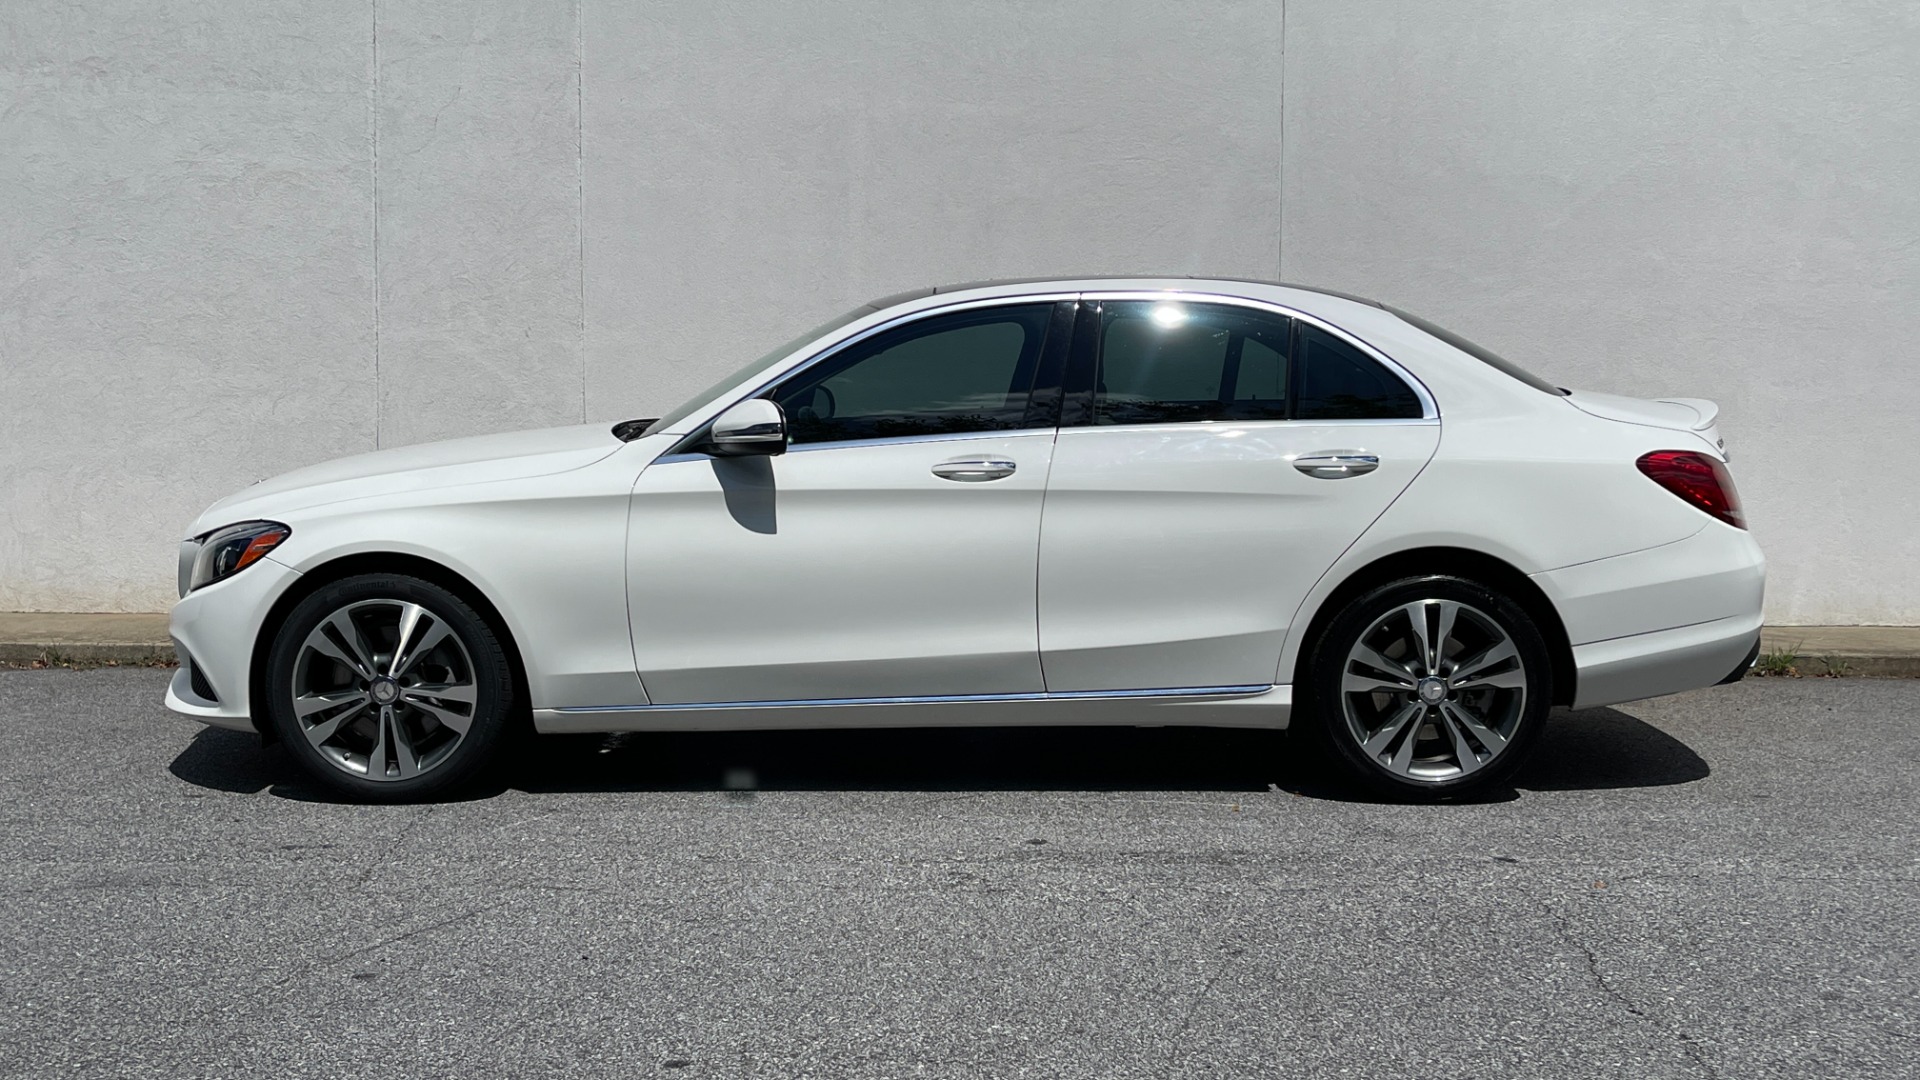 Used 2016 Mercedes-Benz C-Class C300 / 4MATIC / PREMIUM / LINDEN WOOD / ILLUMINATED STAR / MULTIMEDIA for sale $25,995 at Formula Imports in Charlotte NC 28227 9